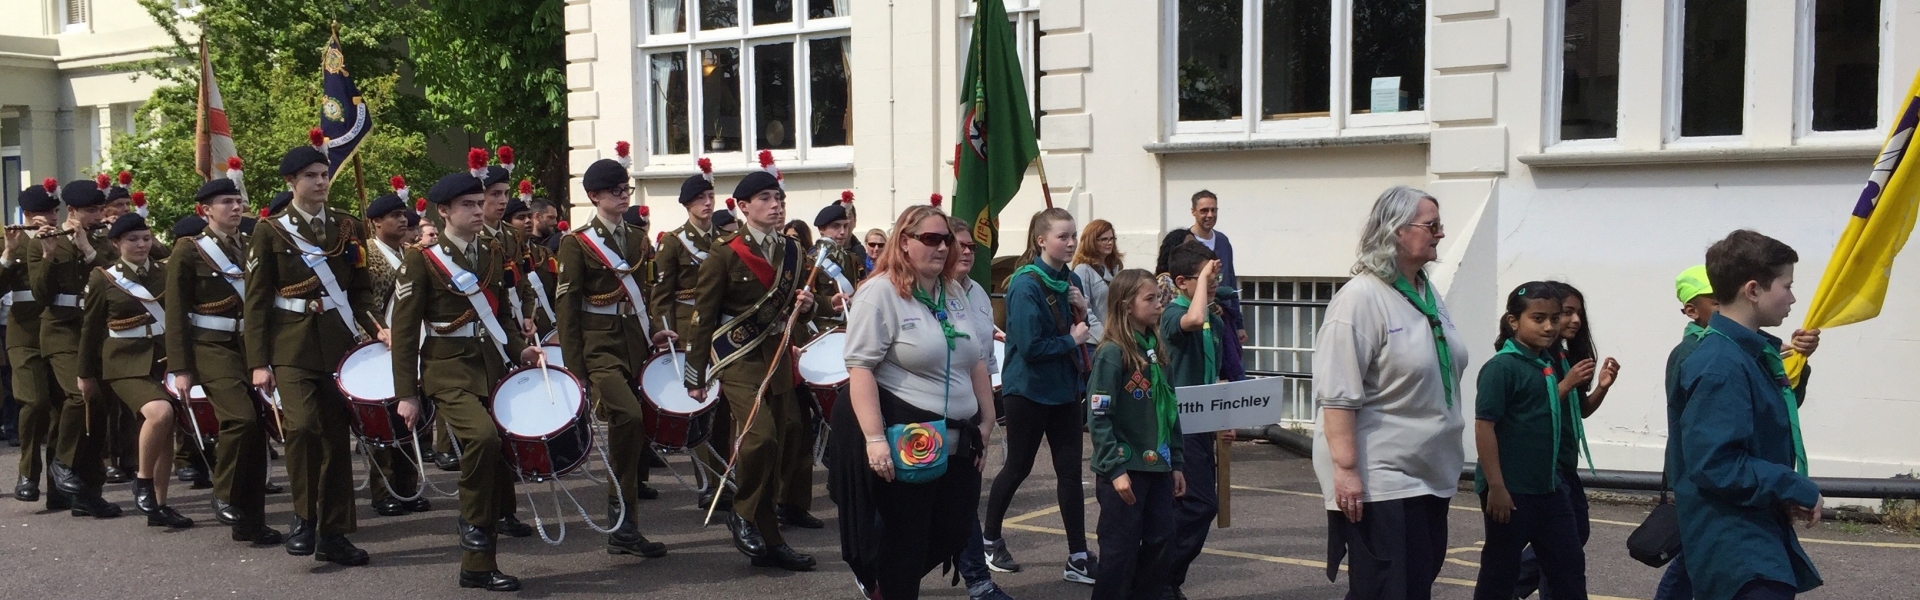 Scout parade Finchley